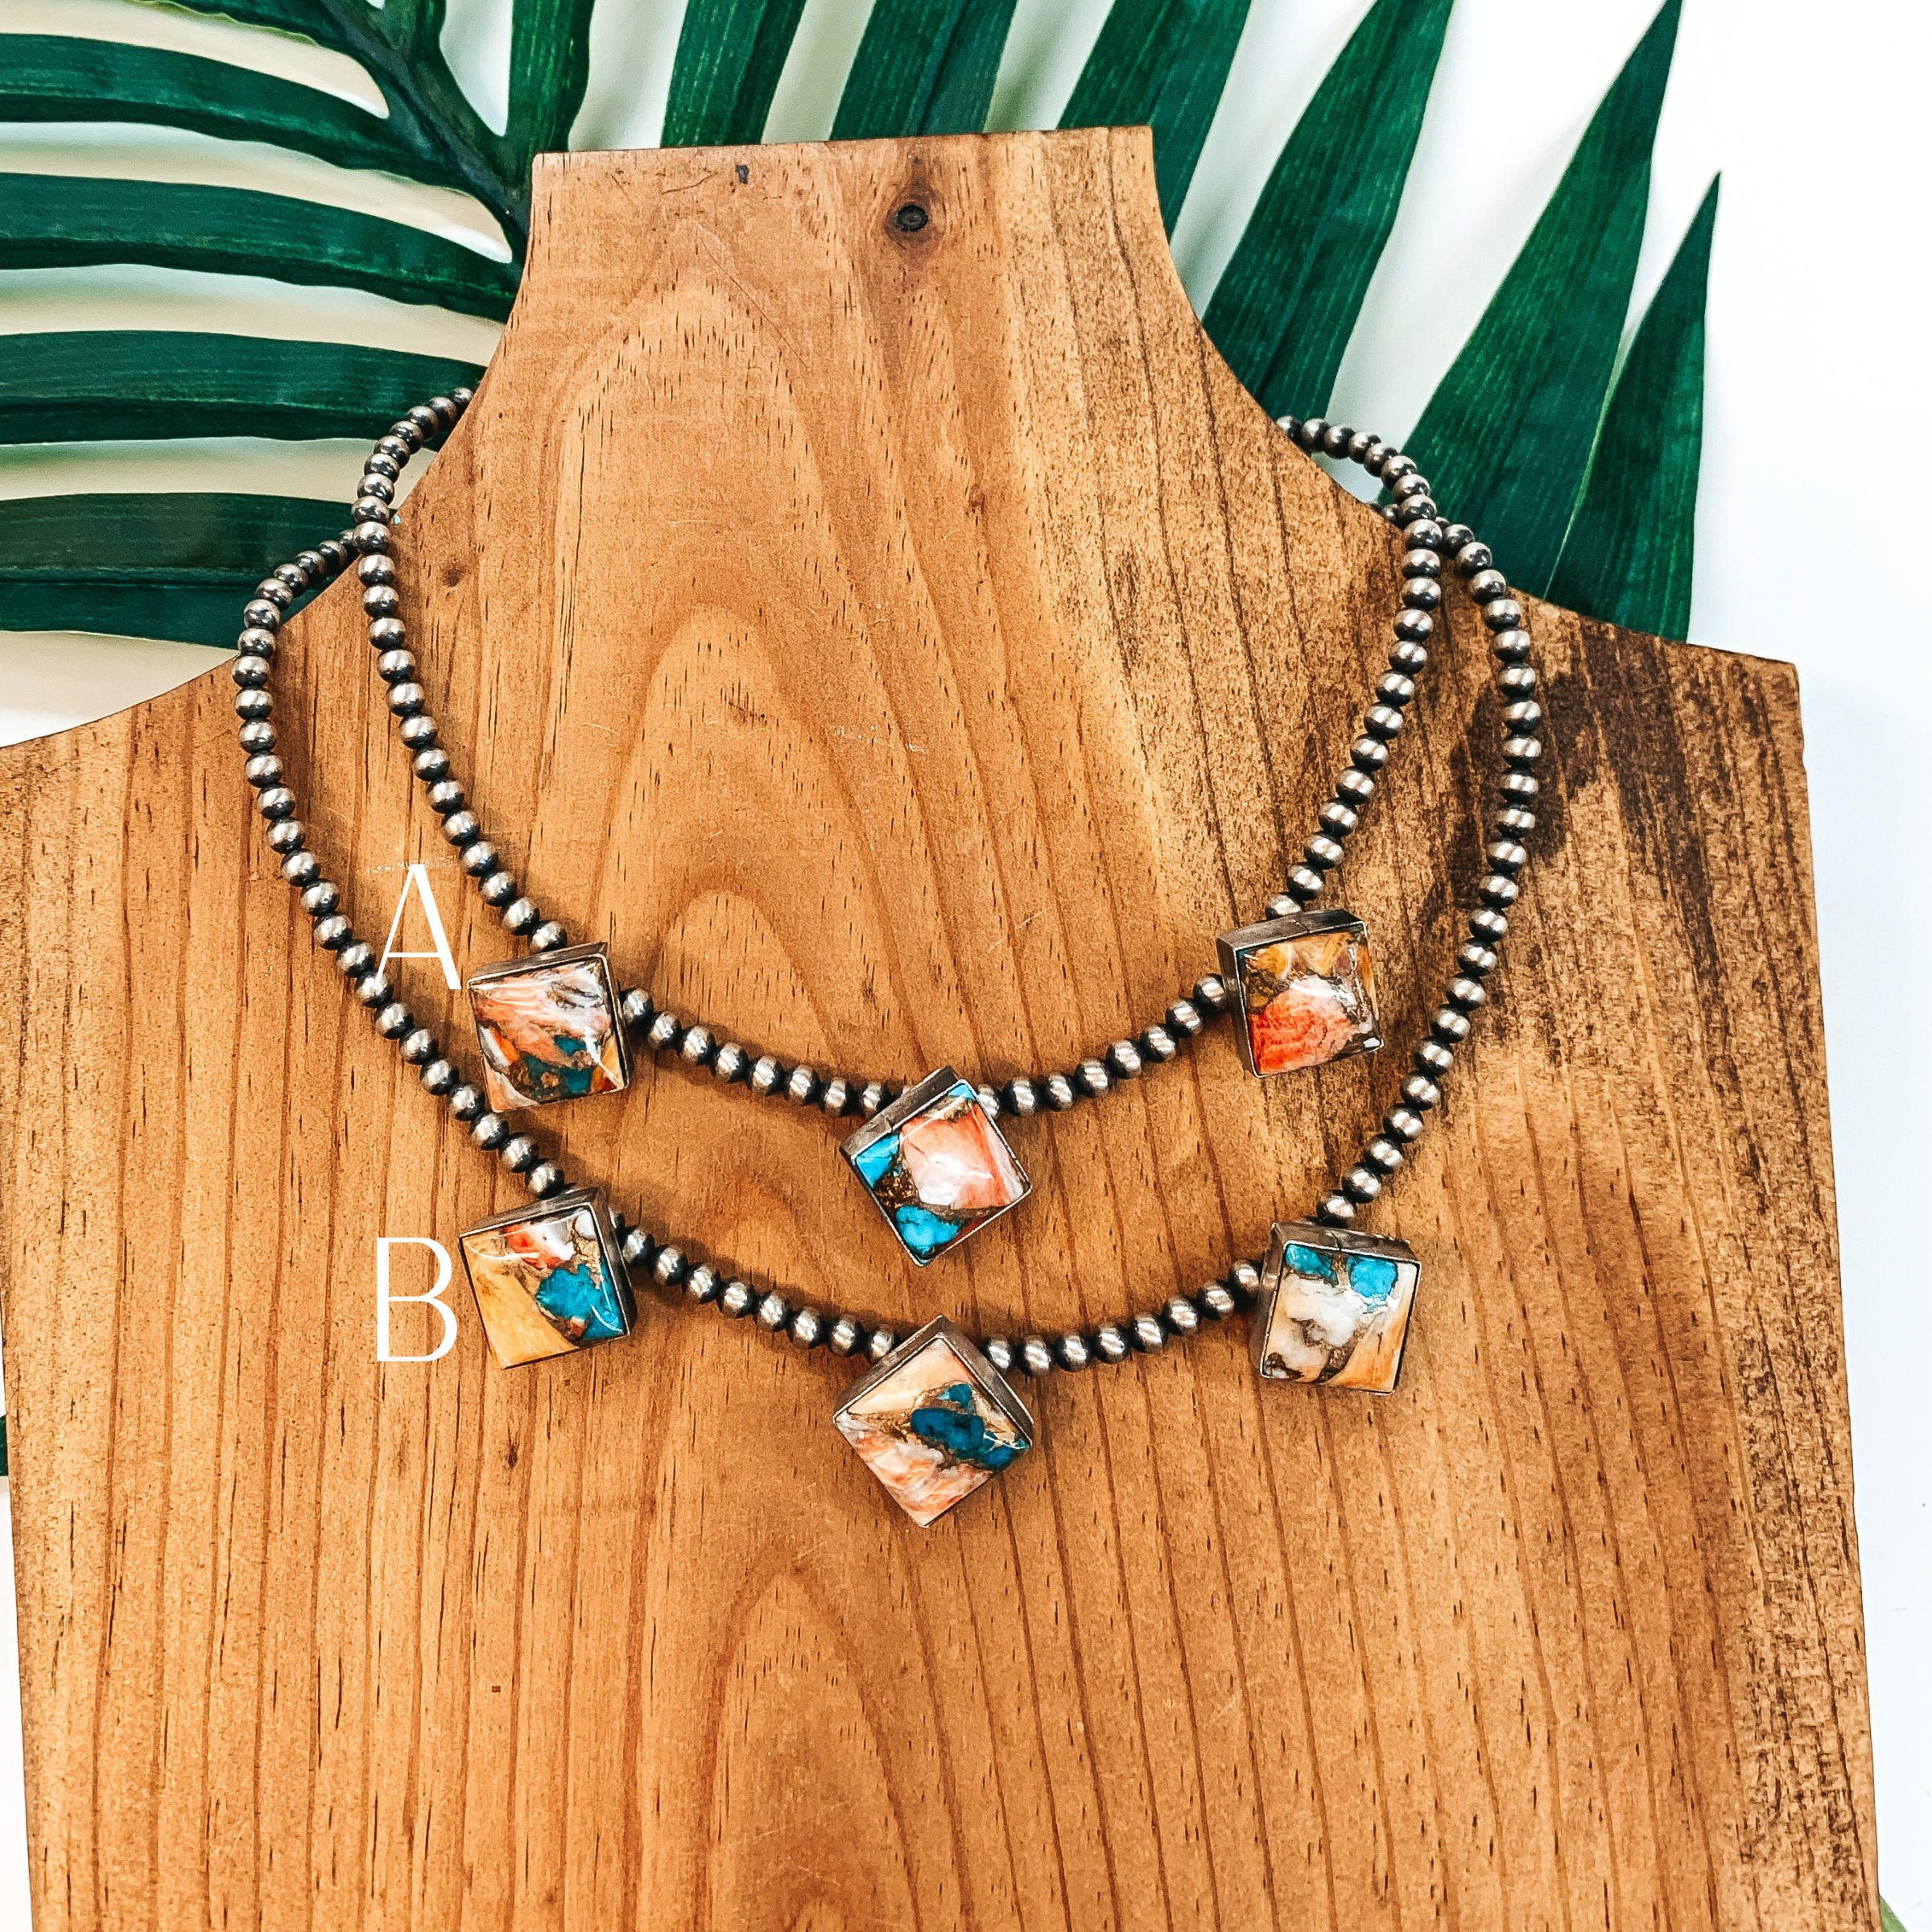 Elouise Kee | Navajo Handmade 4mm 14 inch Navajo Pearl Necklace with 3 Diamond Remix Spiny Oyster and Turquoise Stones - Giddy Up Glamour Boutique